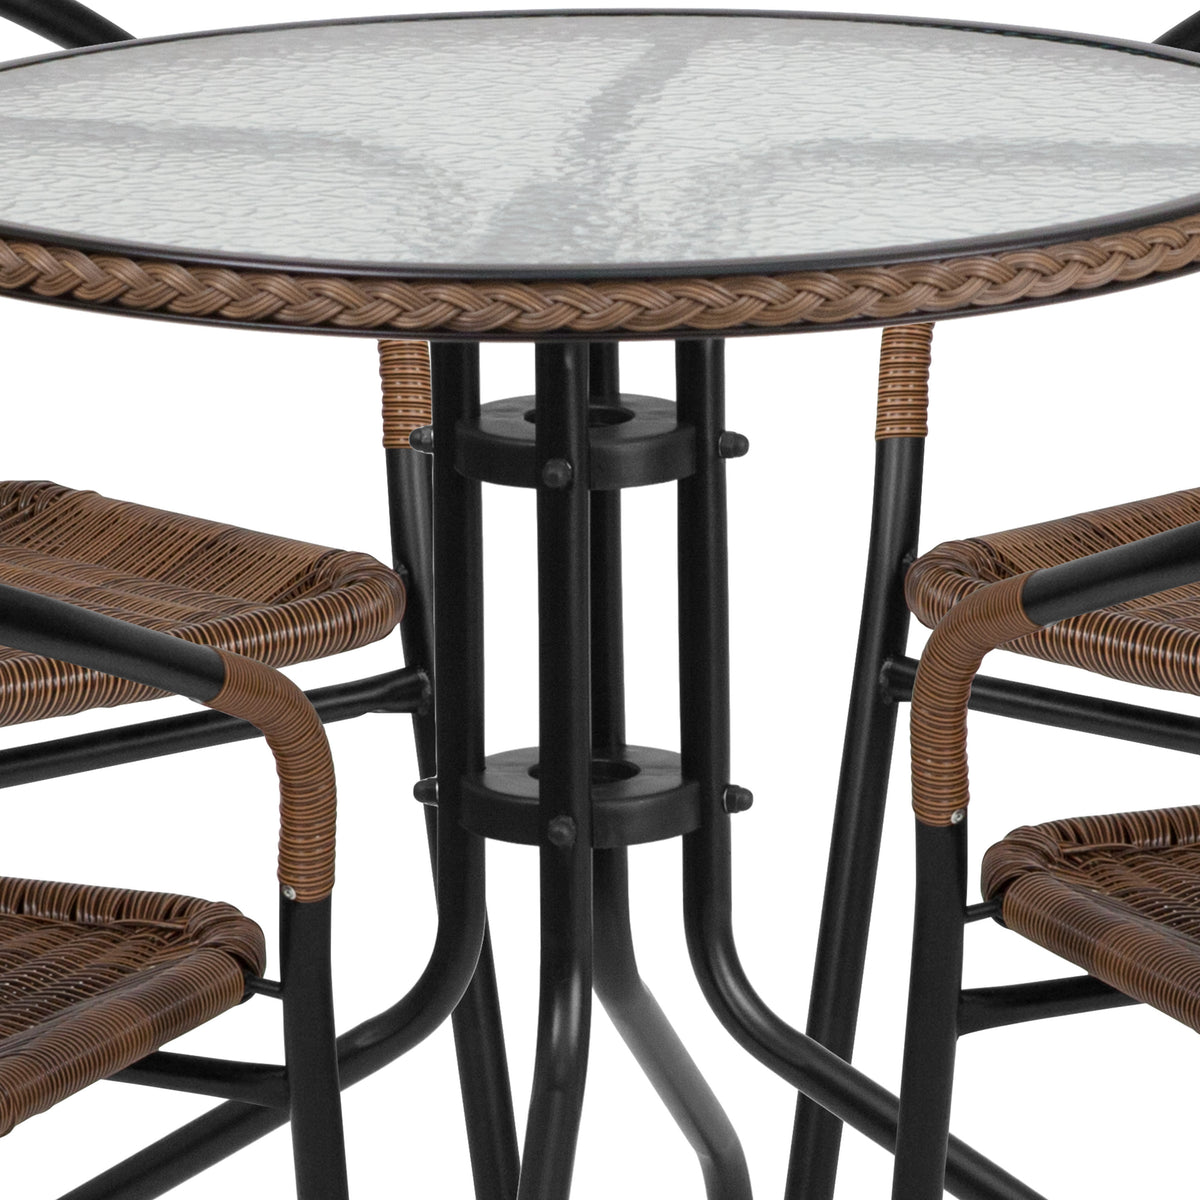 Clear/Dark Brown |#| 28inch RD Glass Metal Table w/ Dk Brown Rattan Edging & 4 Dk Brown Rattan Chairs